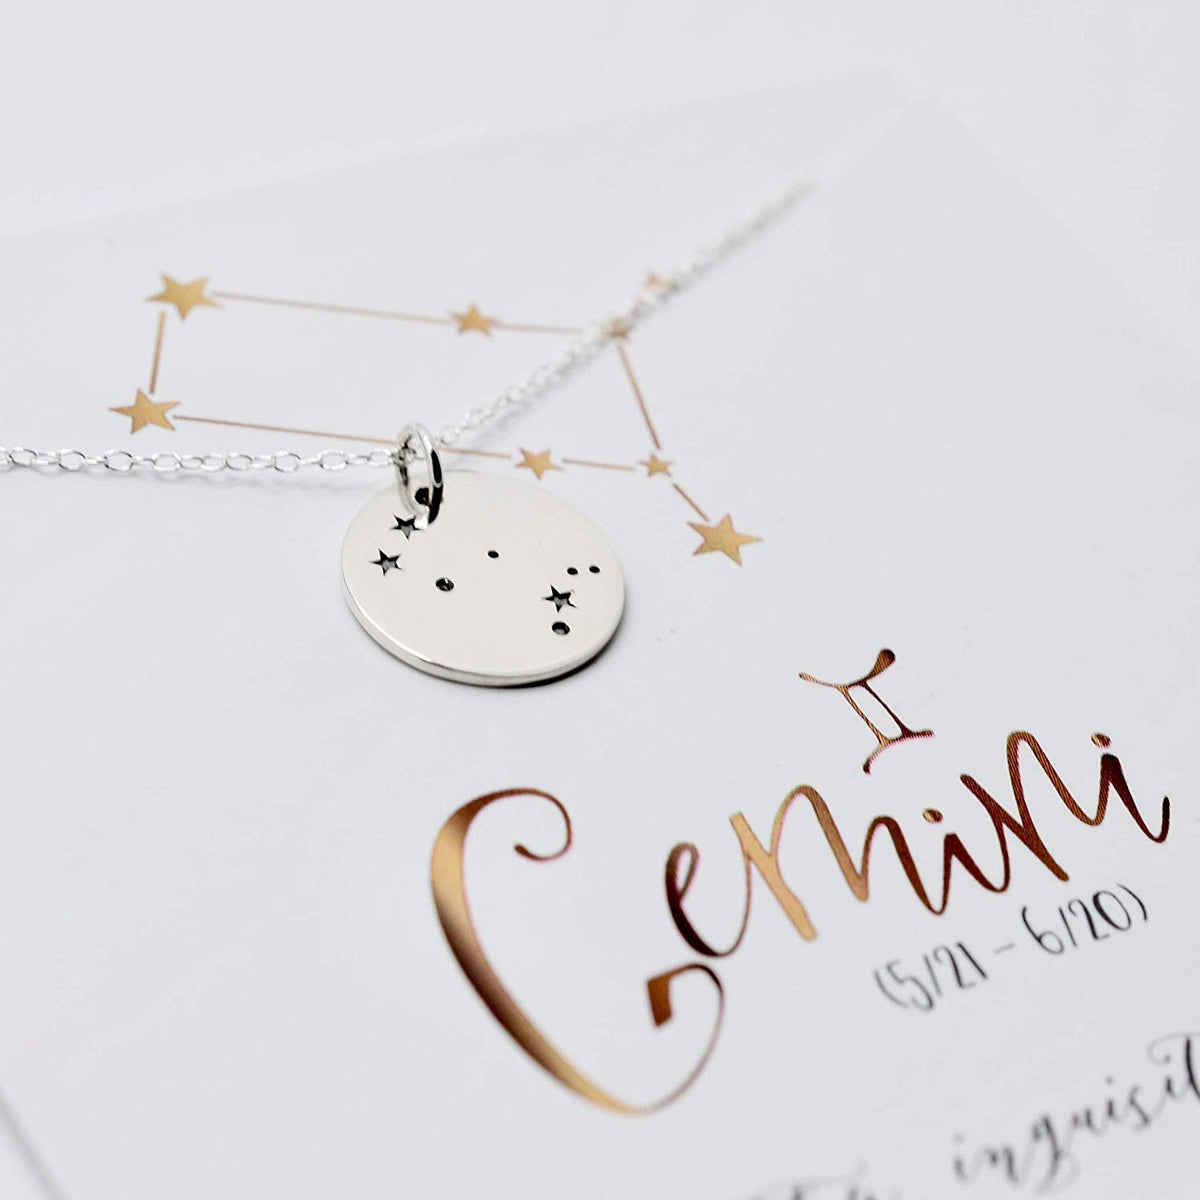 Gemini Zodiac Sign Sterling Silver Constellation Necklace - Love It Personalized